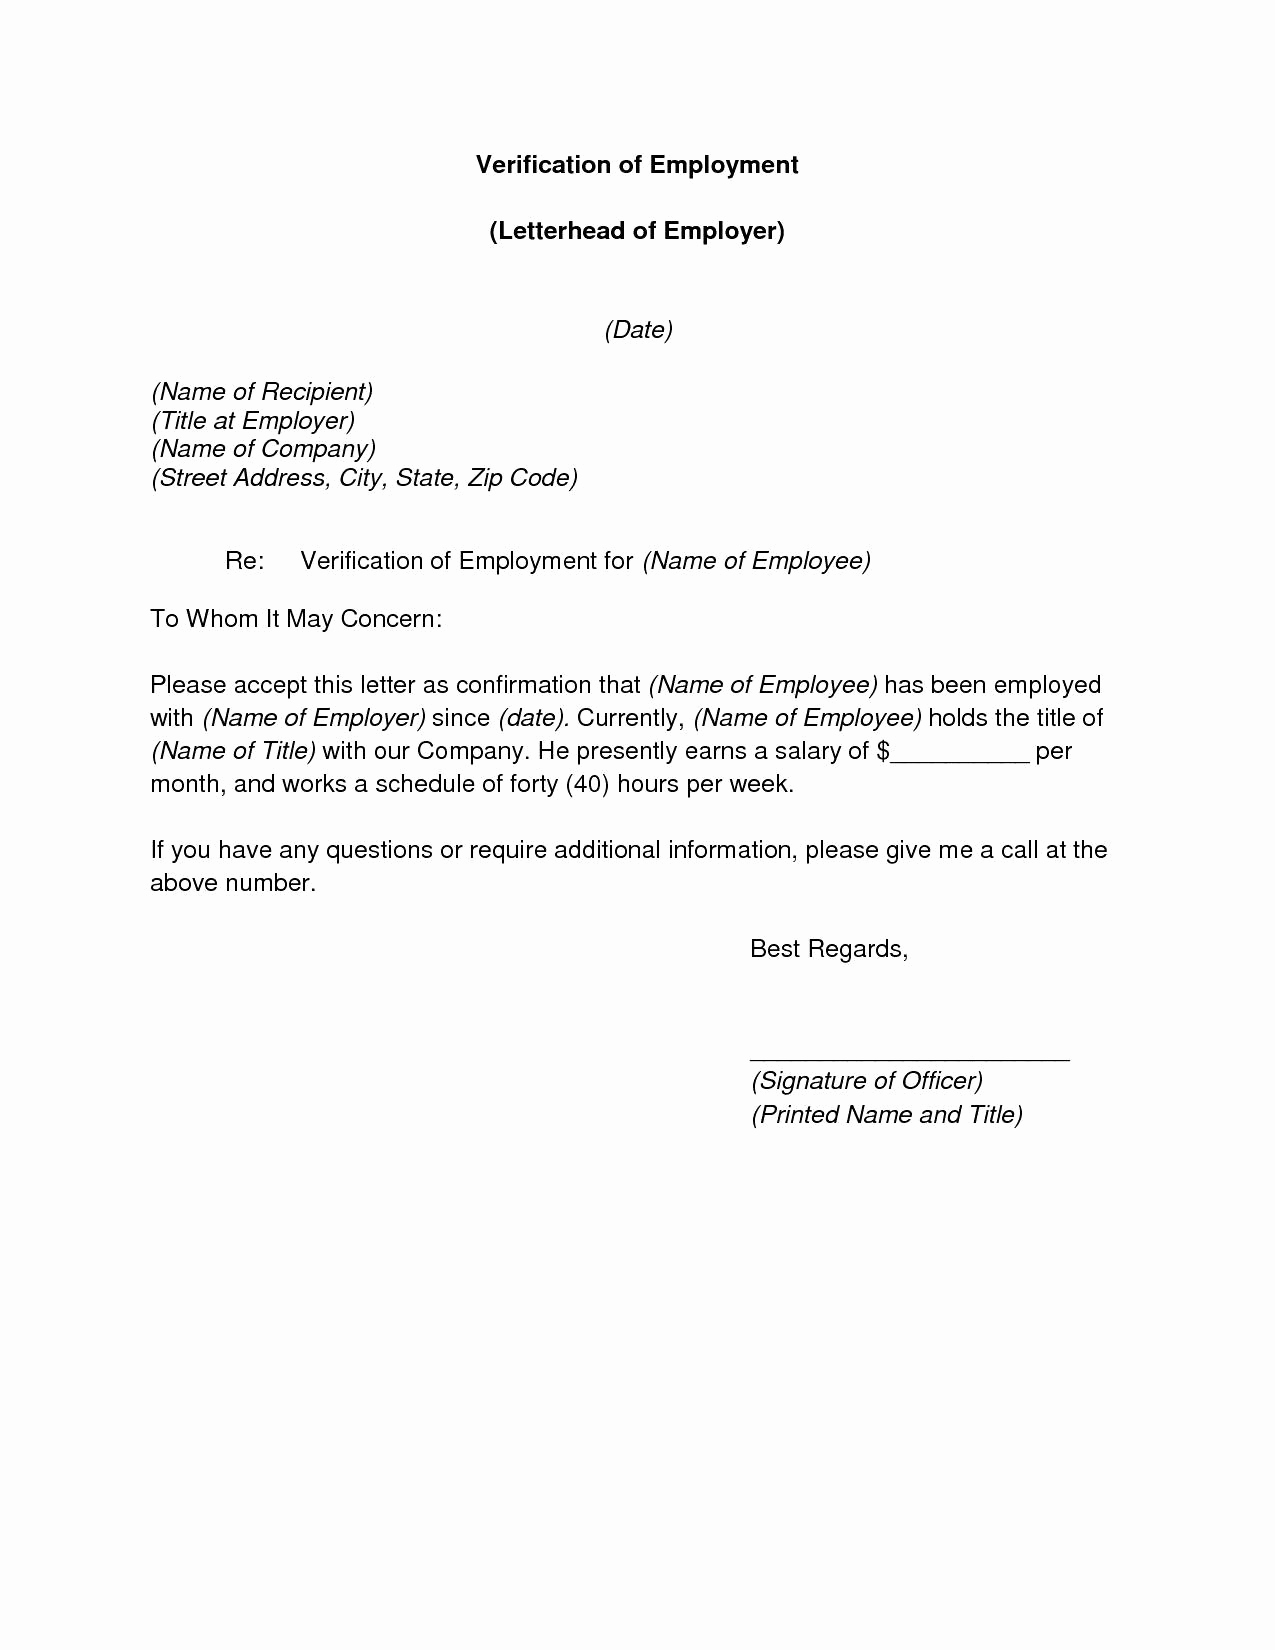 employment verification letter to whom it may concern template